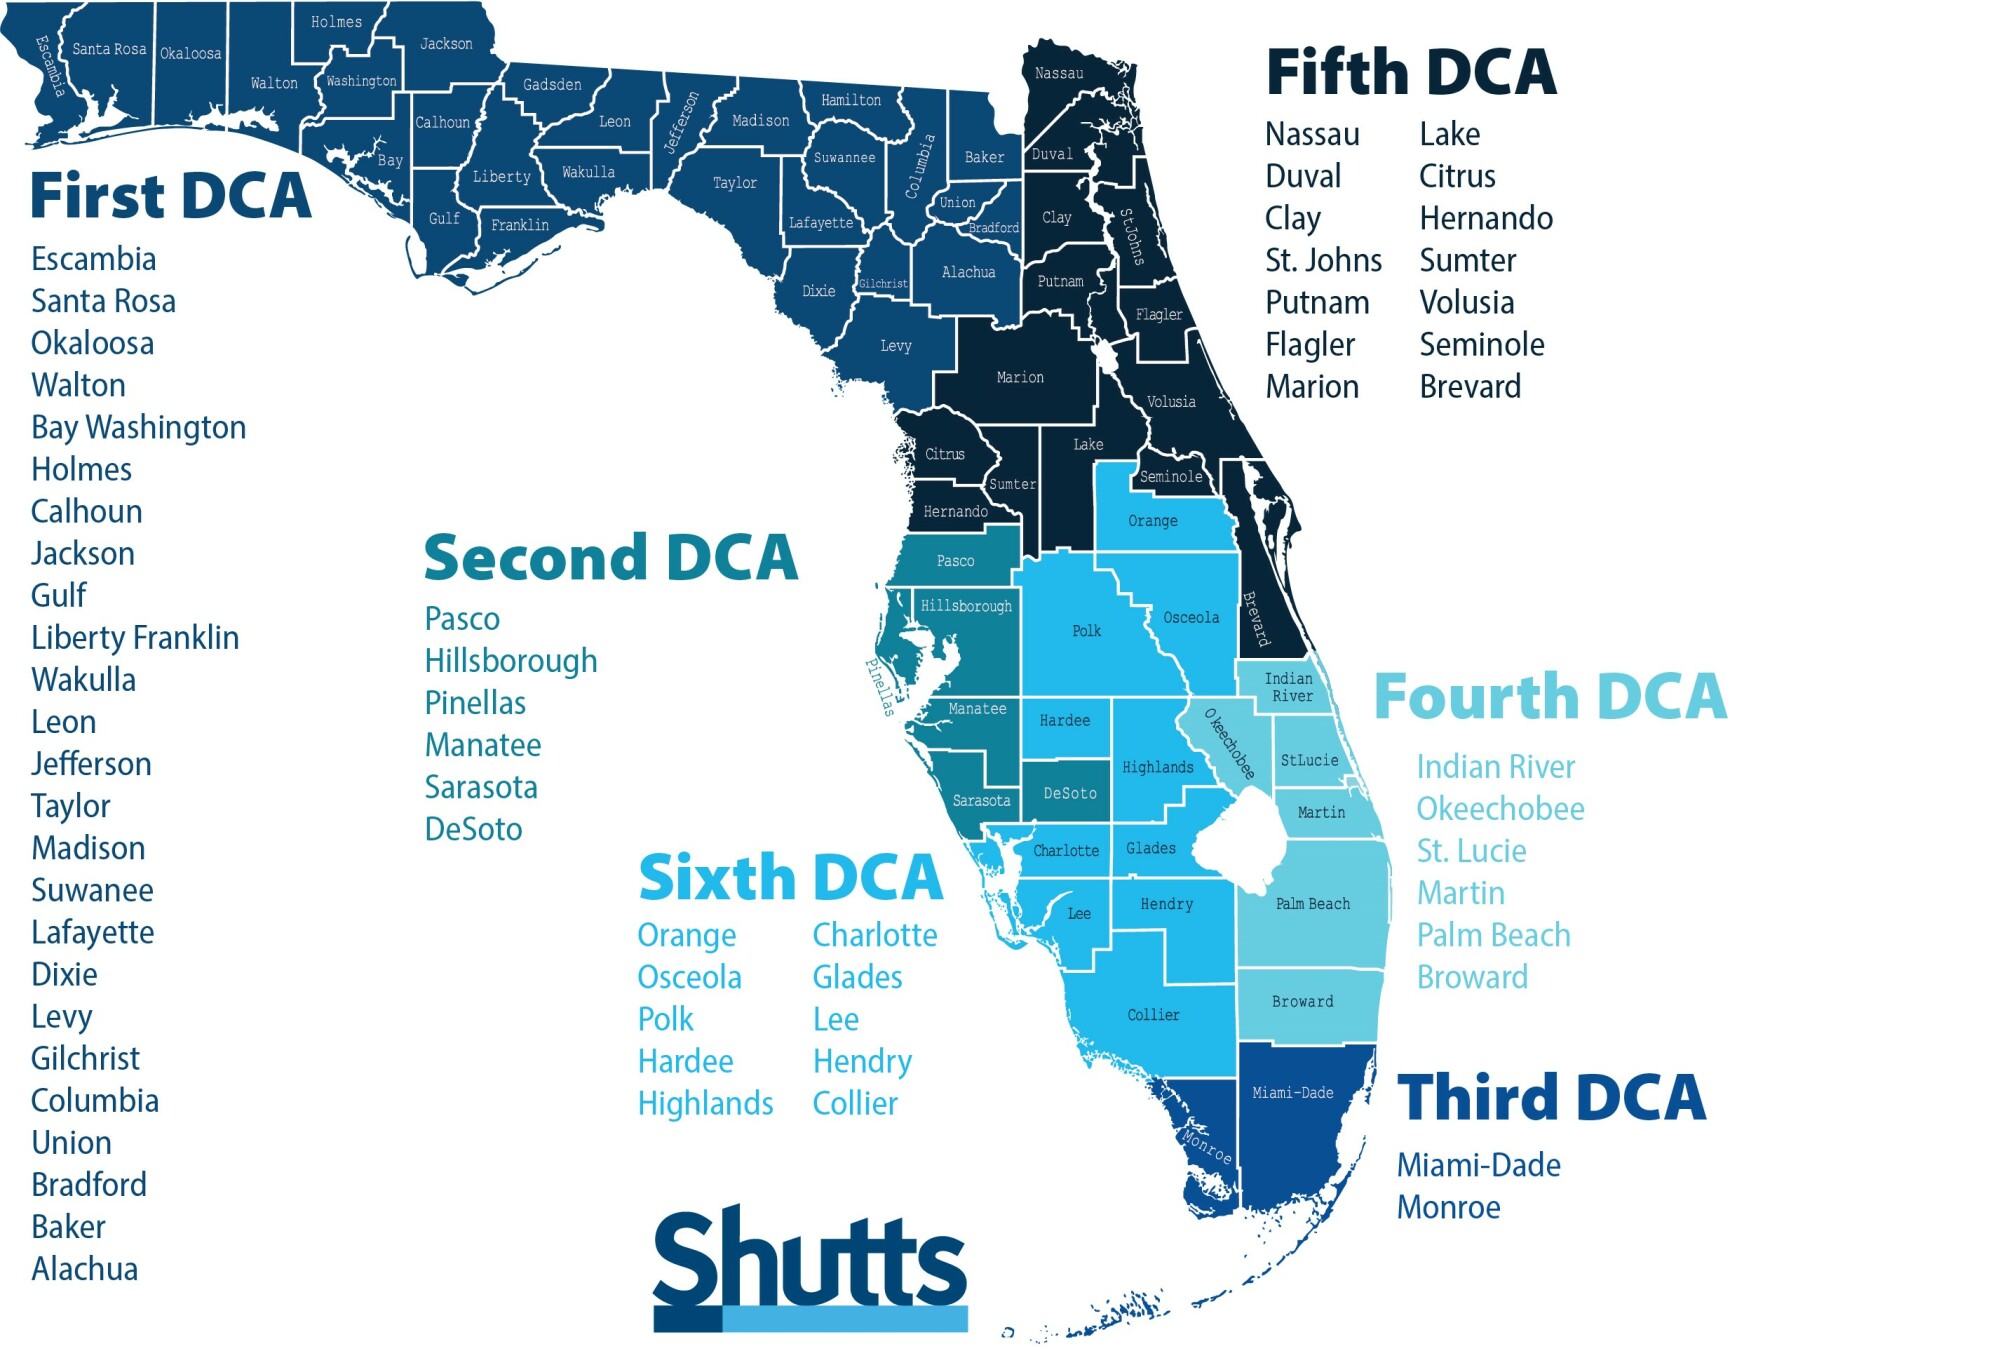 Florida District Courts of Appeal - Counties